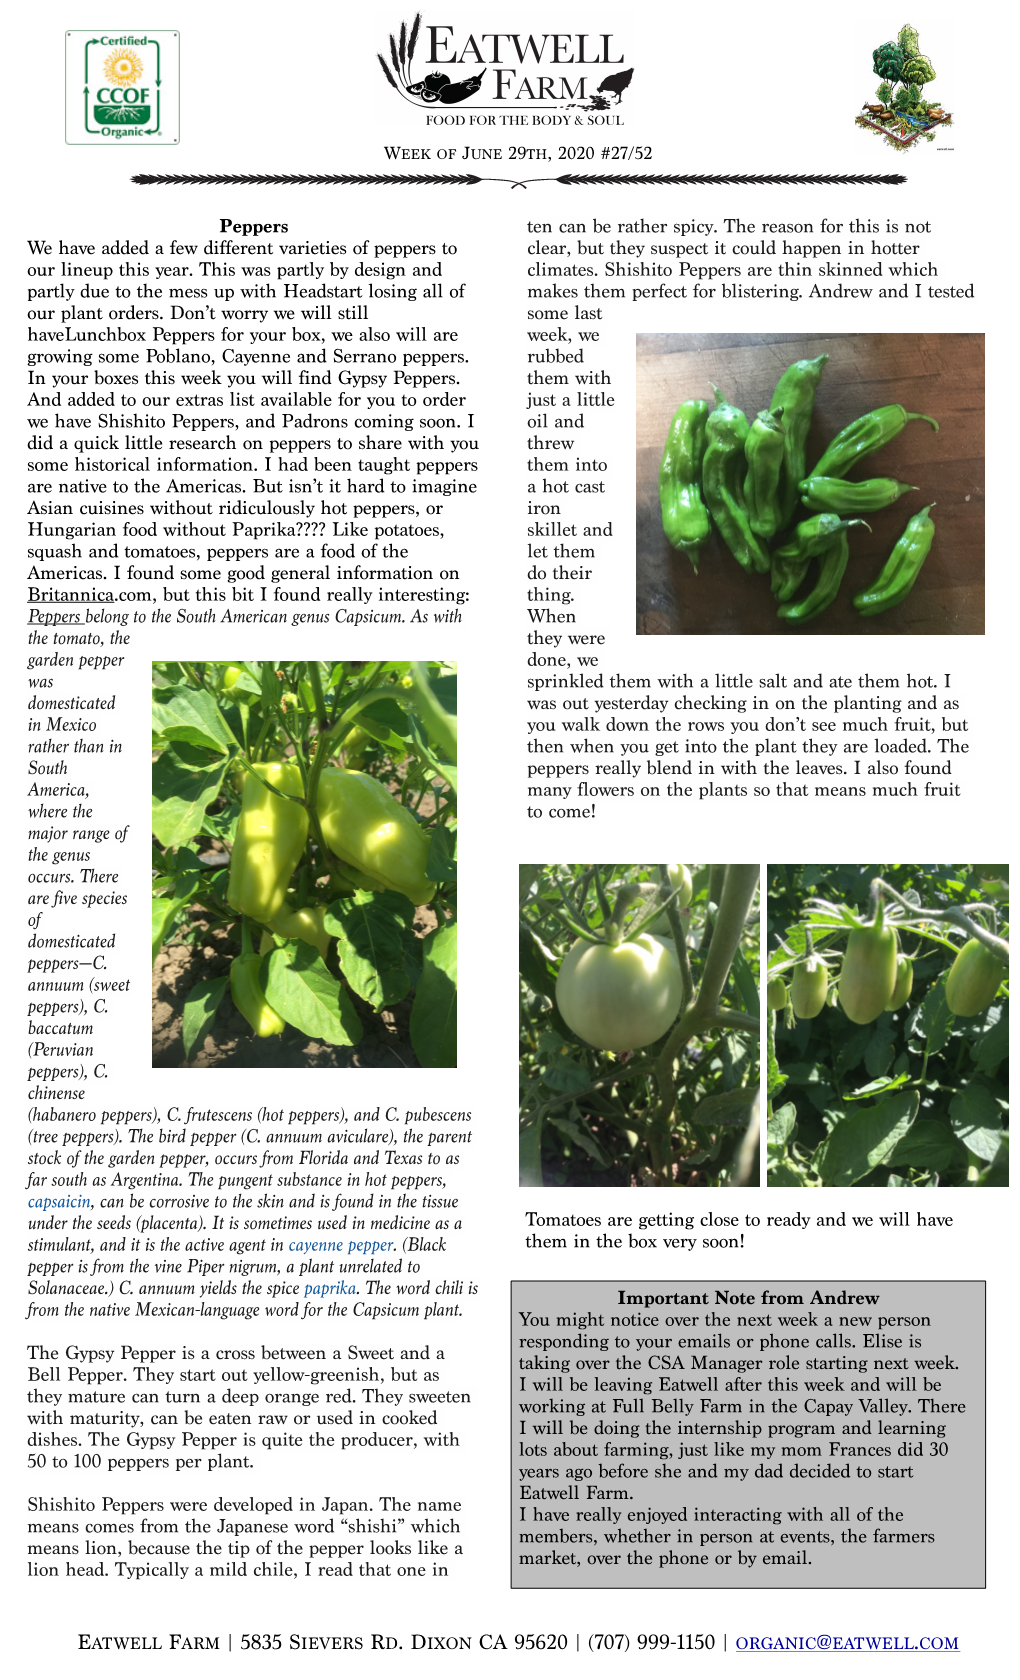 Eatwell Farm News 20200629.Pages